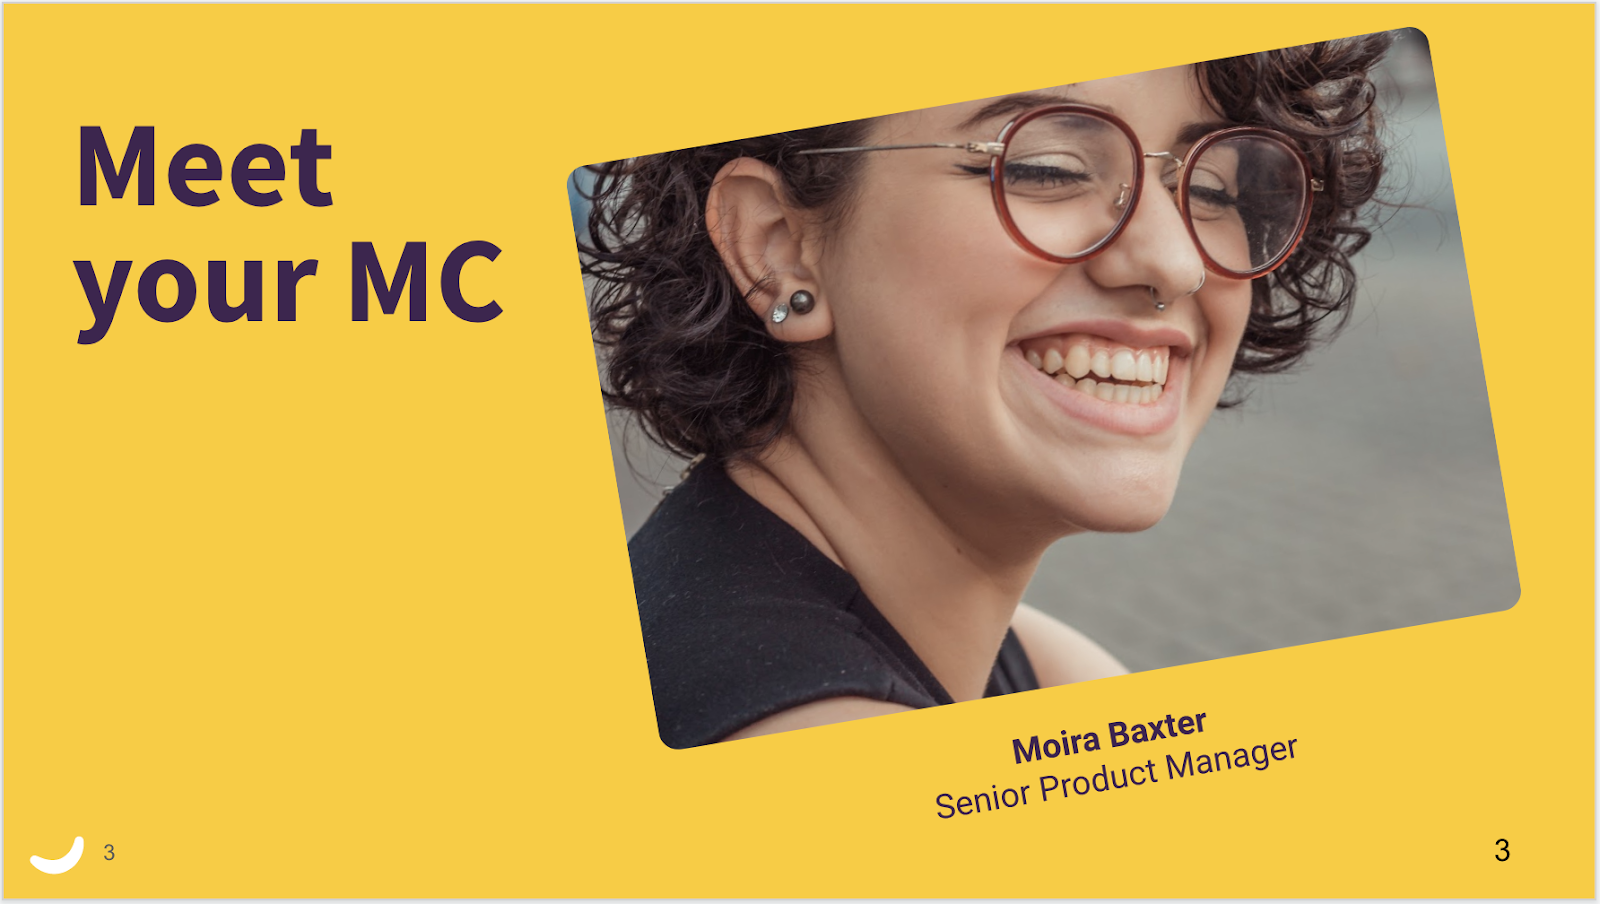 A Bananatag yellow presentation slide that says "Meet your MC" with a photo of a woman with glasses smiling, underneat his her title "Senior Product Manager" and name: Moira Baxter.